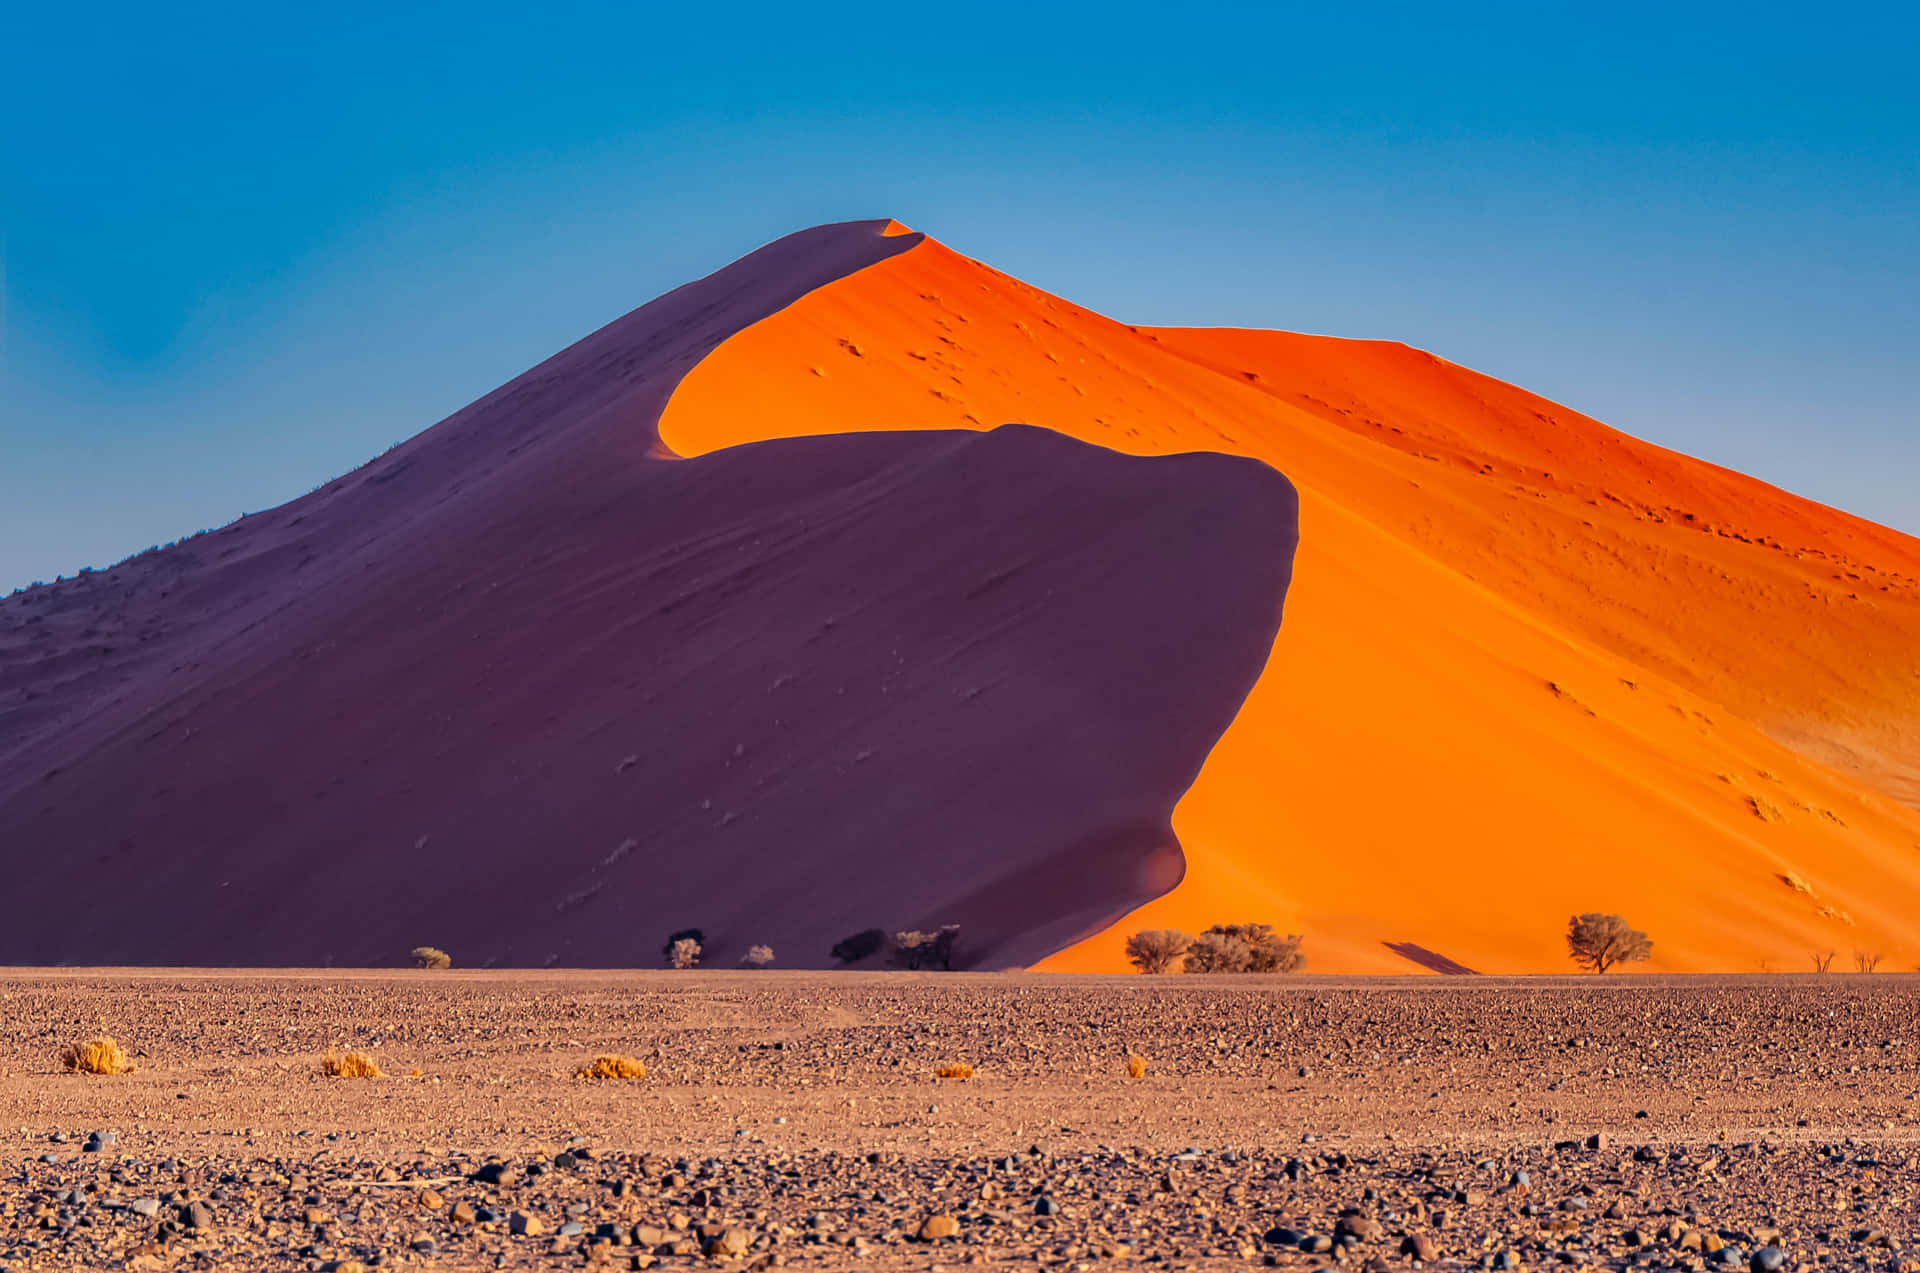 A Large Sand Dune In The Desert